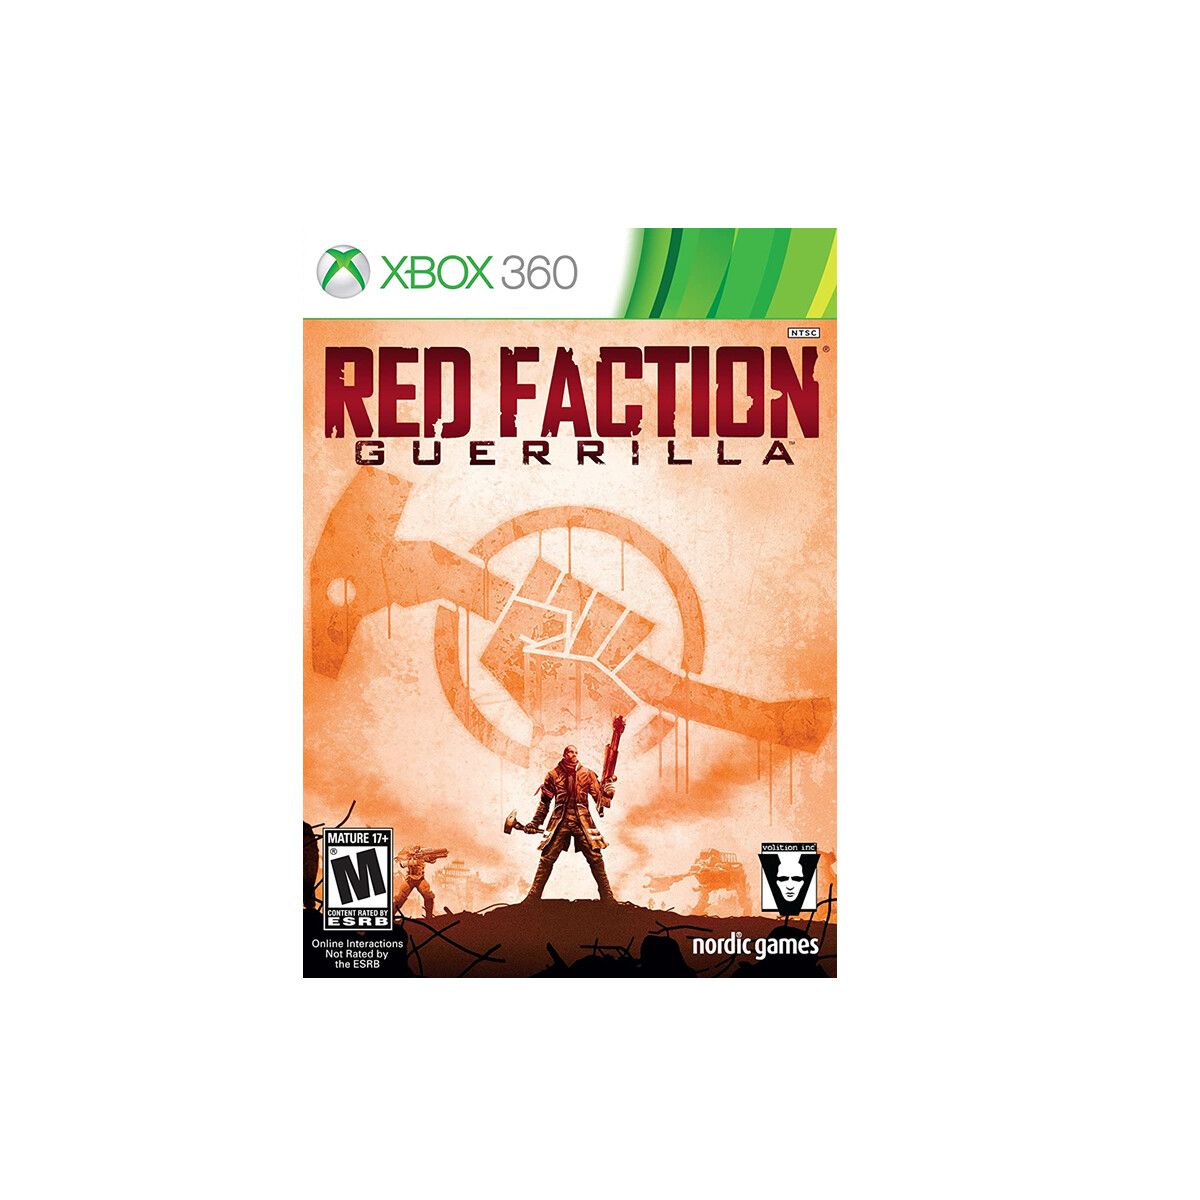 XBOX 360 RED FACTION: GUERRILLA 